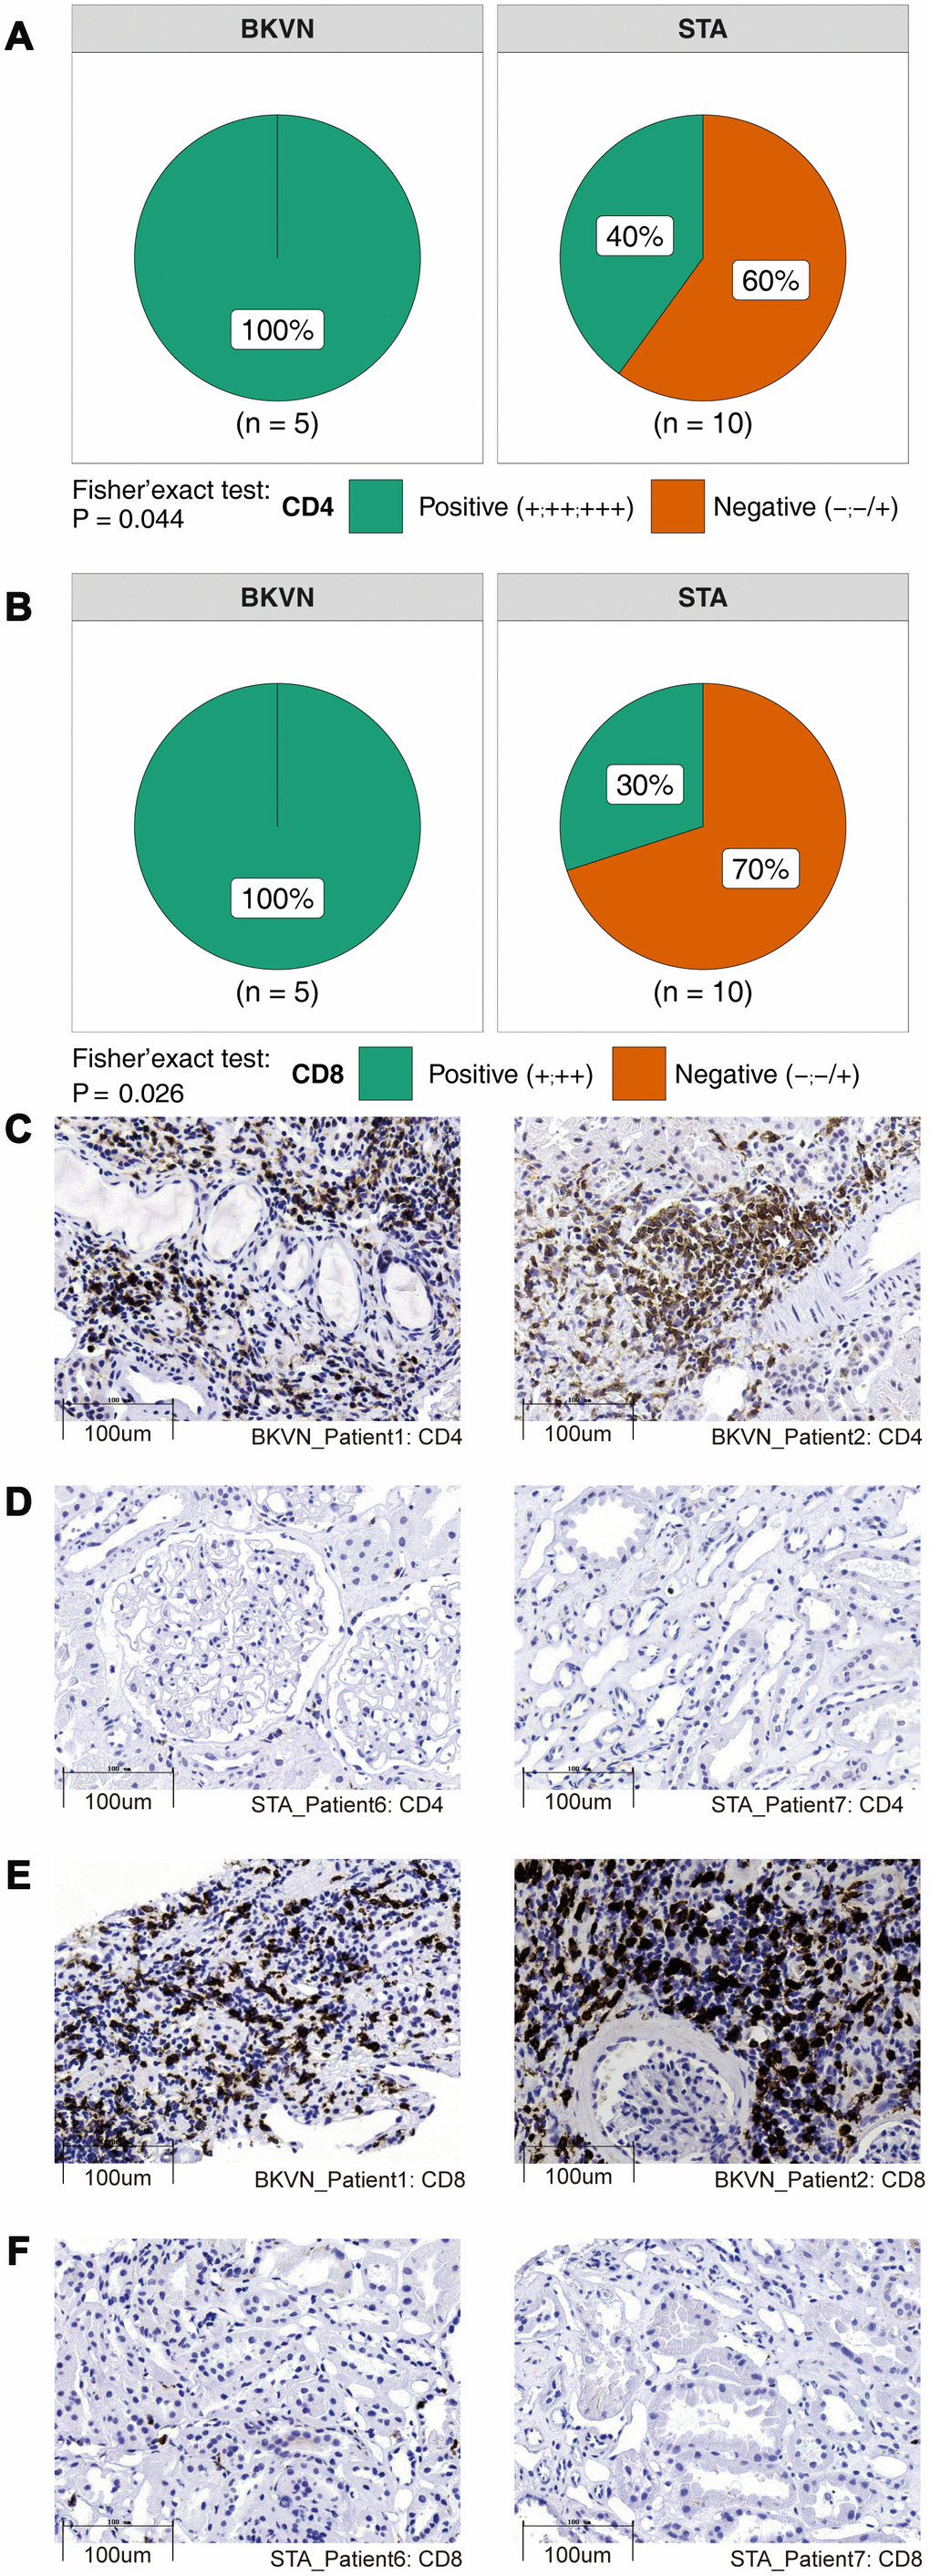 Comparison of immunohistochemical characterization of the CD4+ and CD8+ cells between BKVN and STA. (A, B) BKVN was associated with increased CD4+ (A) and CD8+ cells (B). (Fisher's exact test). (C–F) Immunohistochemical features (CD4 and CD8) of BKVN and STA.